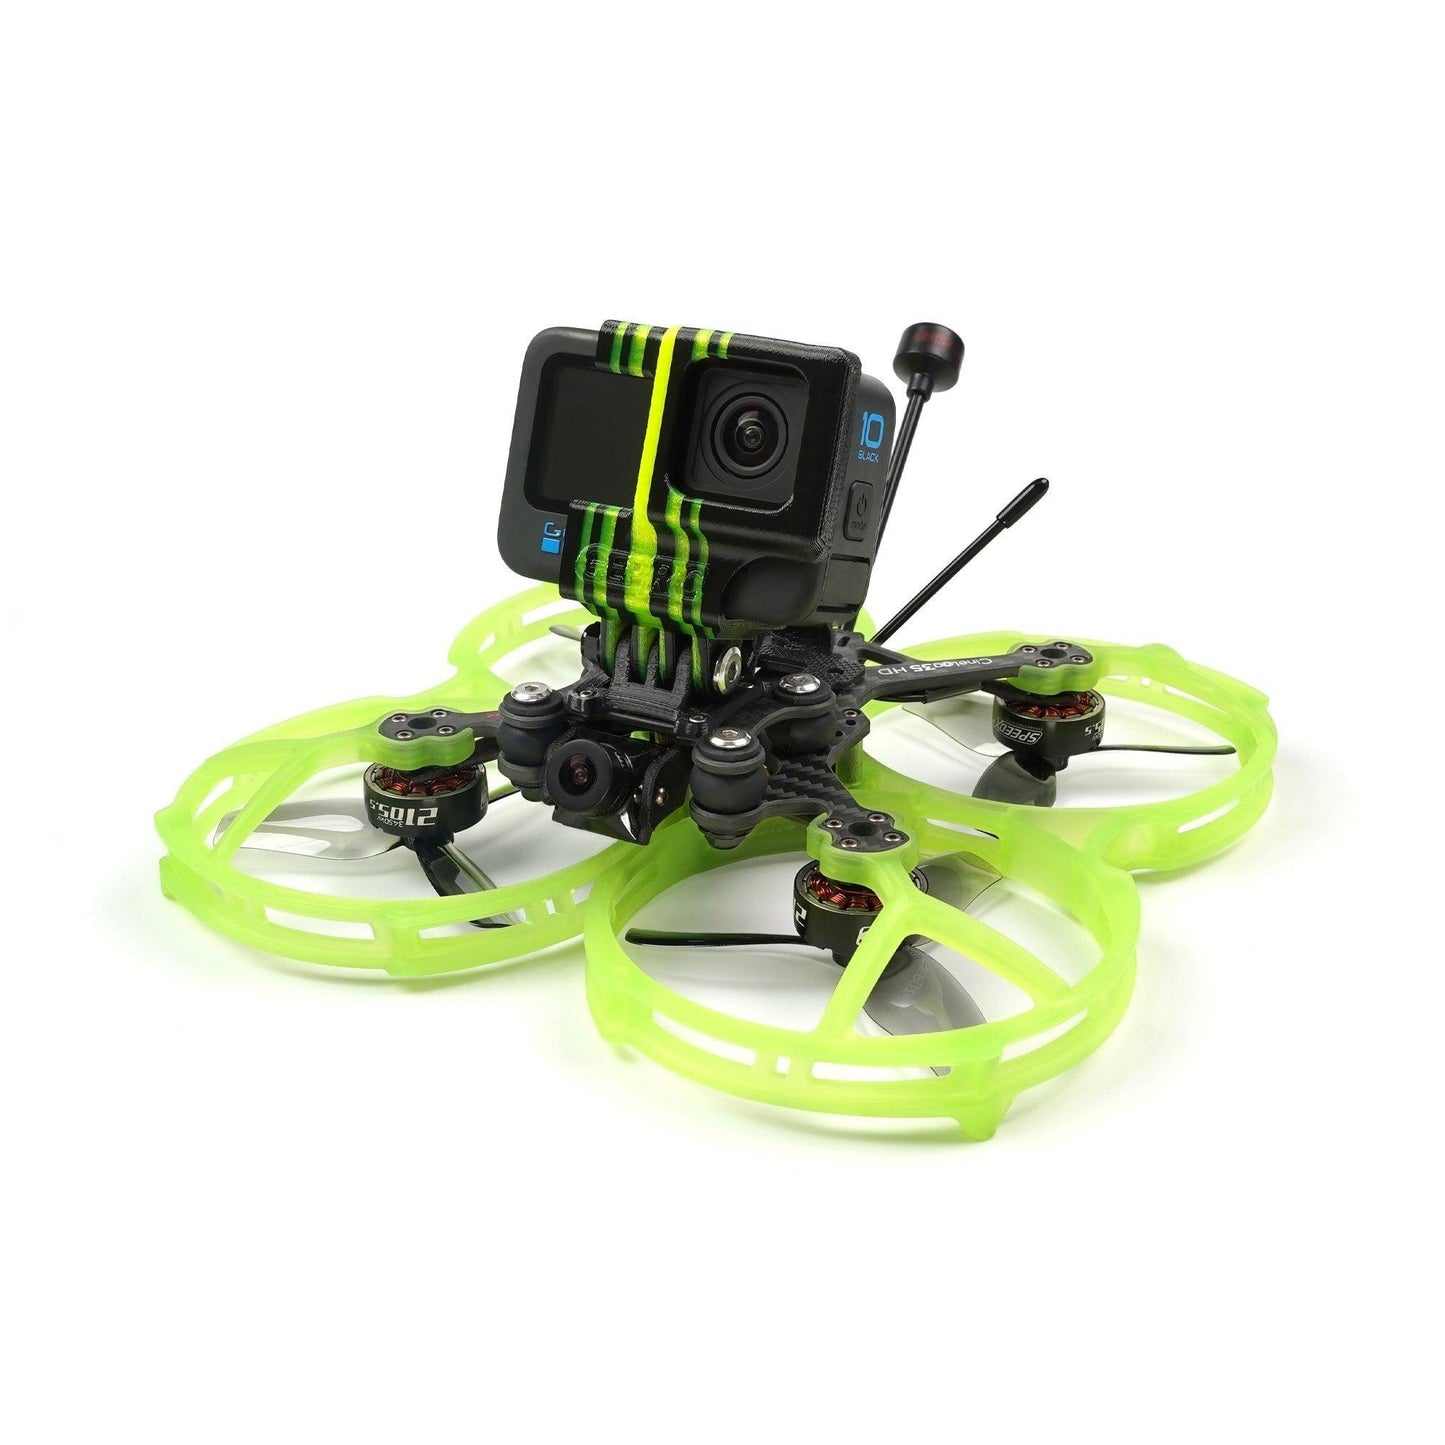 GEPRC CineLog35 Cinewhoop -  F722-45A SPEEDX2 2105.5-2650 For RC FPV Quadcopter Freestyle Drone Performance HD VISTA Nebula Pro 6S